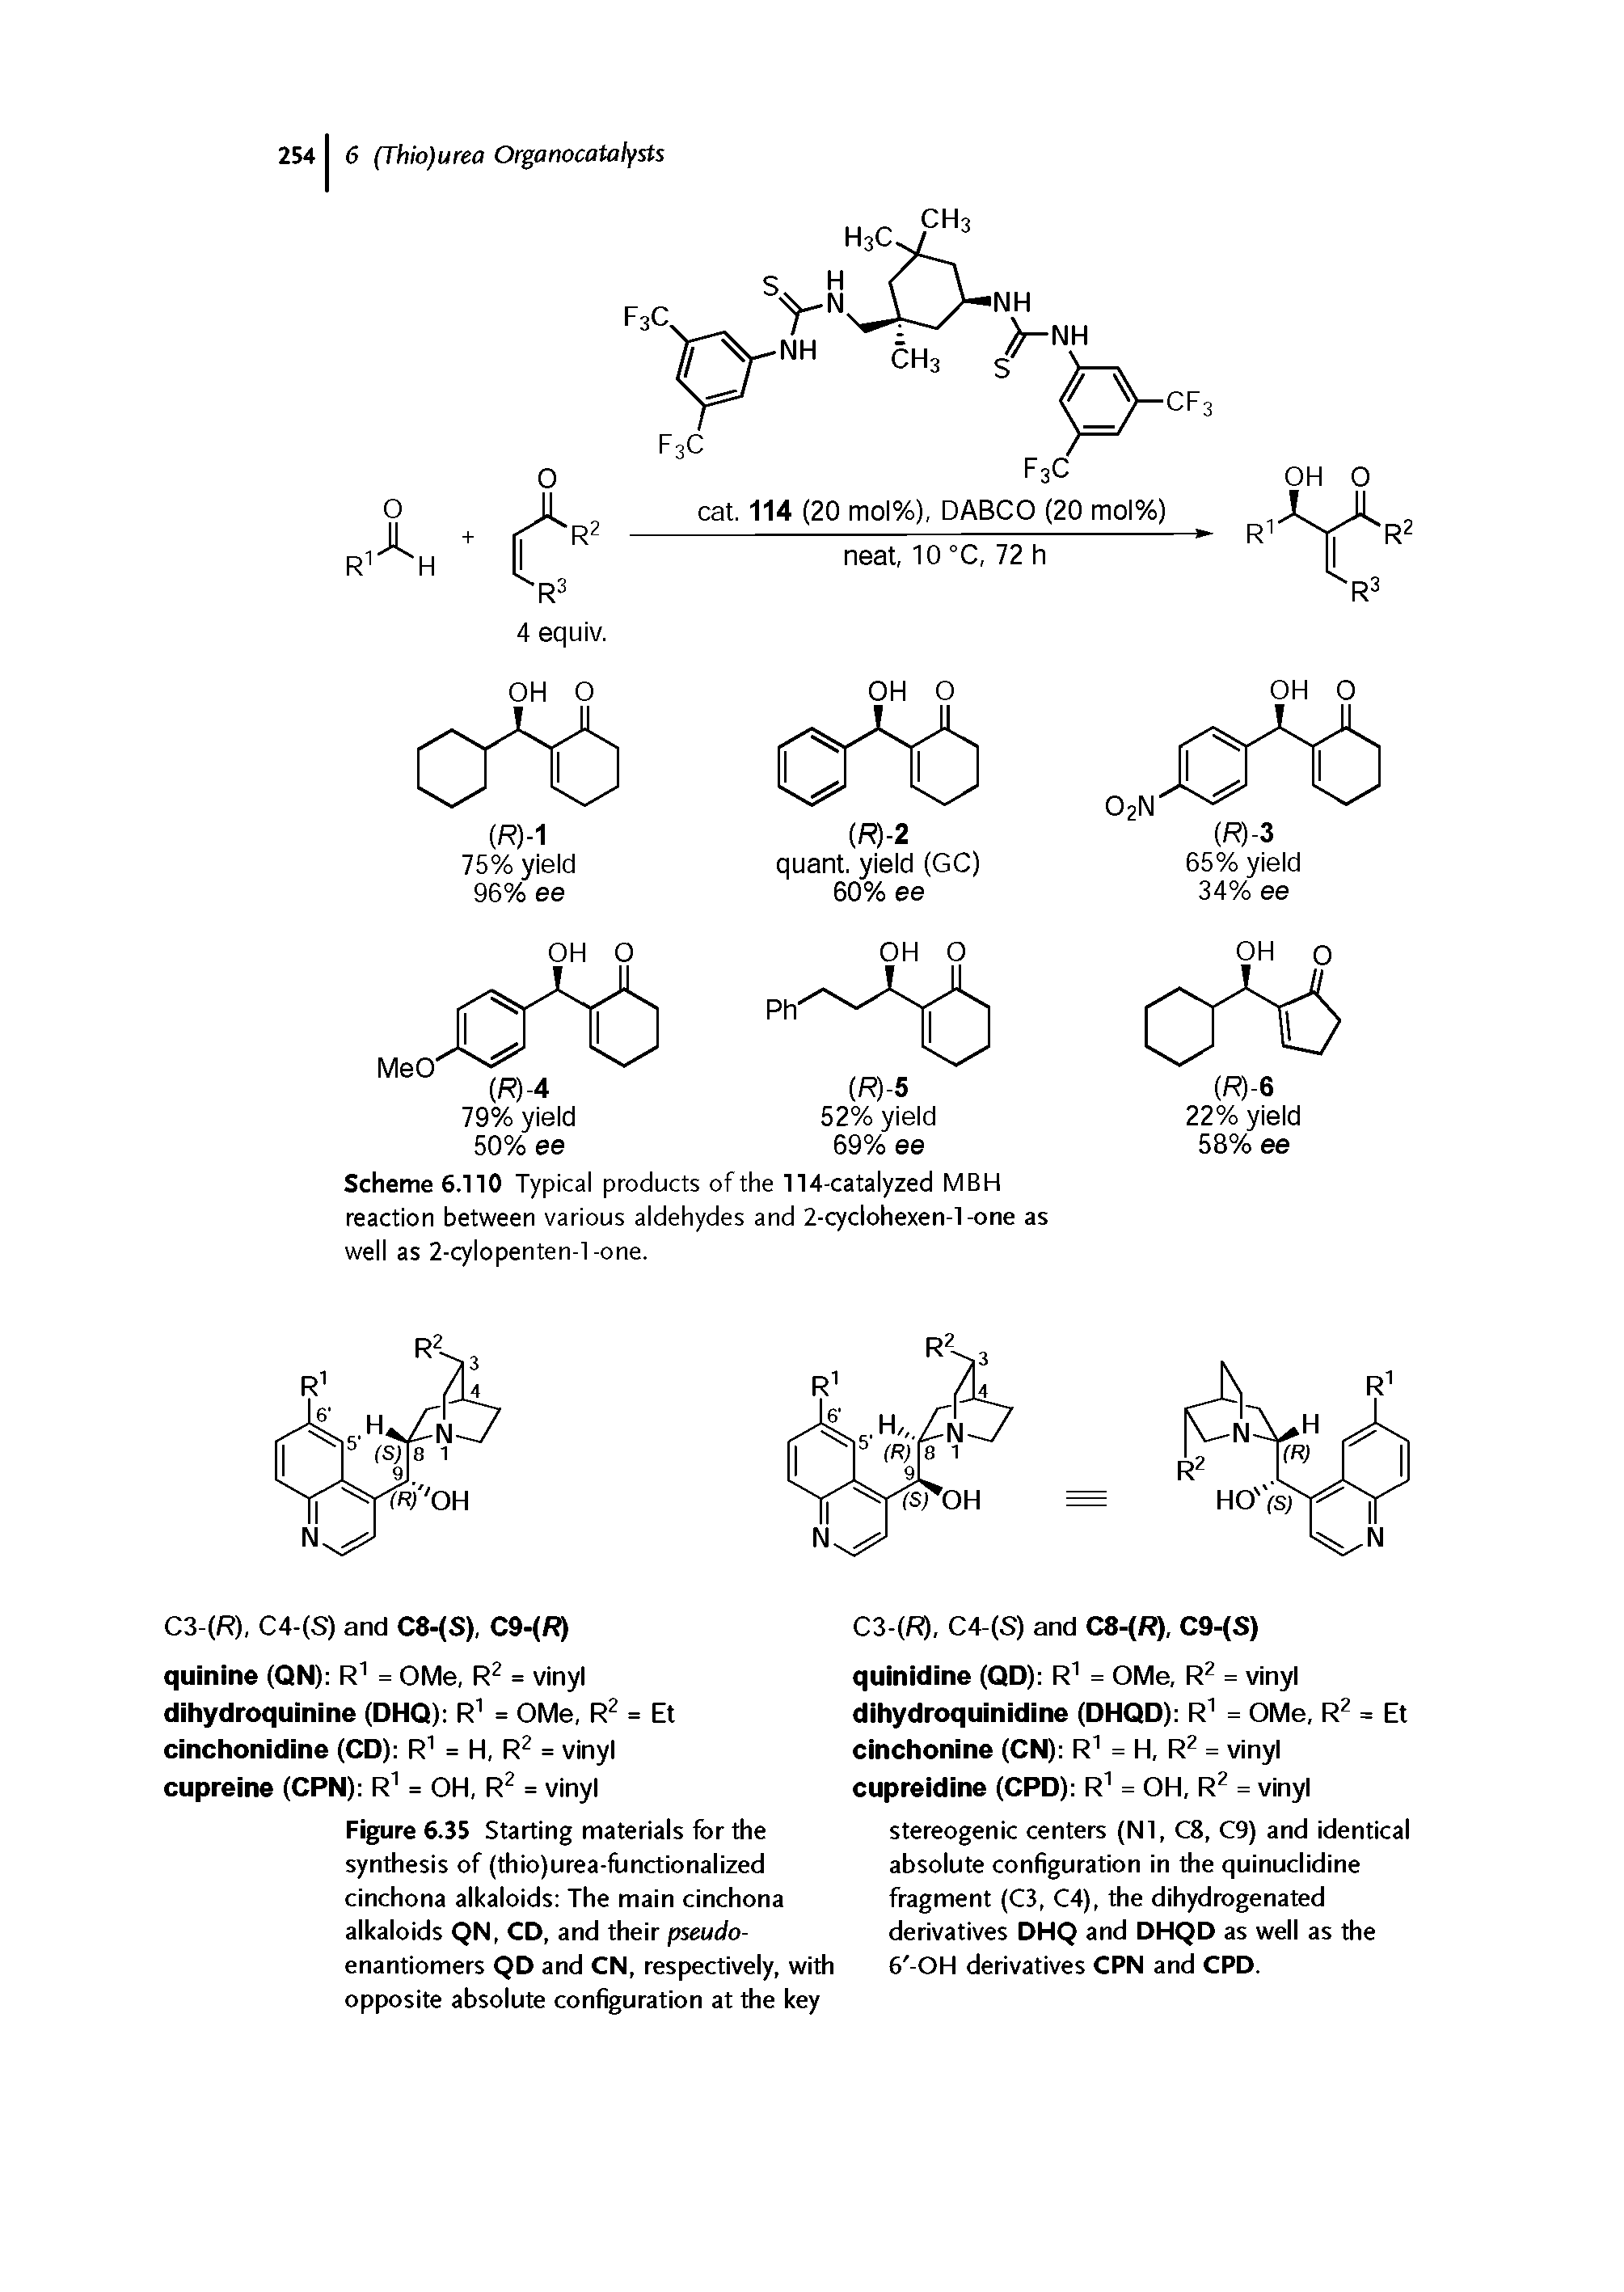 Figure 6.35 Starting materials for the synthesis of (thio)urea-flinctionalized cinchona alkaloids The main cinchona alkaloids QN, CD, and their pseudoenantiomers QD and CN, respectively, with opposite absolute configuration at the key...